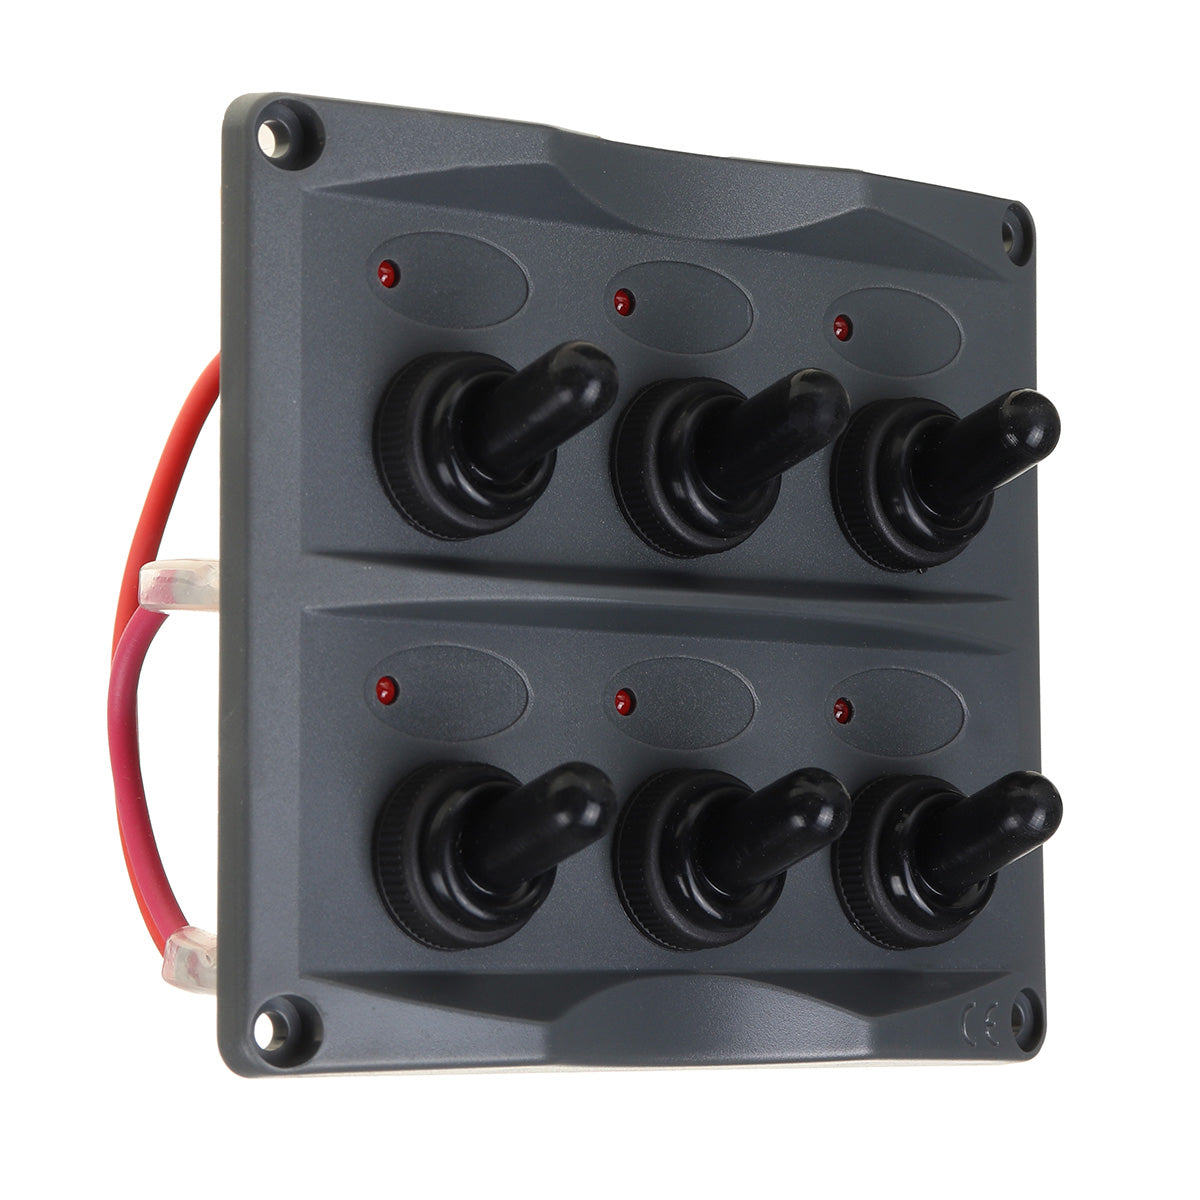 Dark Slate Gray 6 Gang 12V LED Switch Panel Water Resistant Toggle Switches Fuses Boat Marine